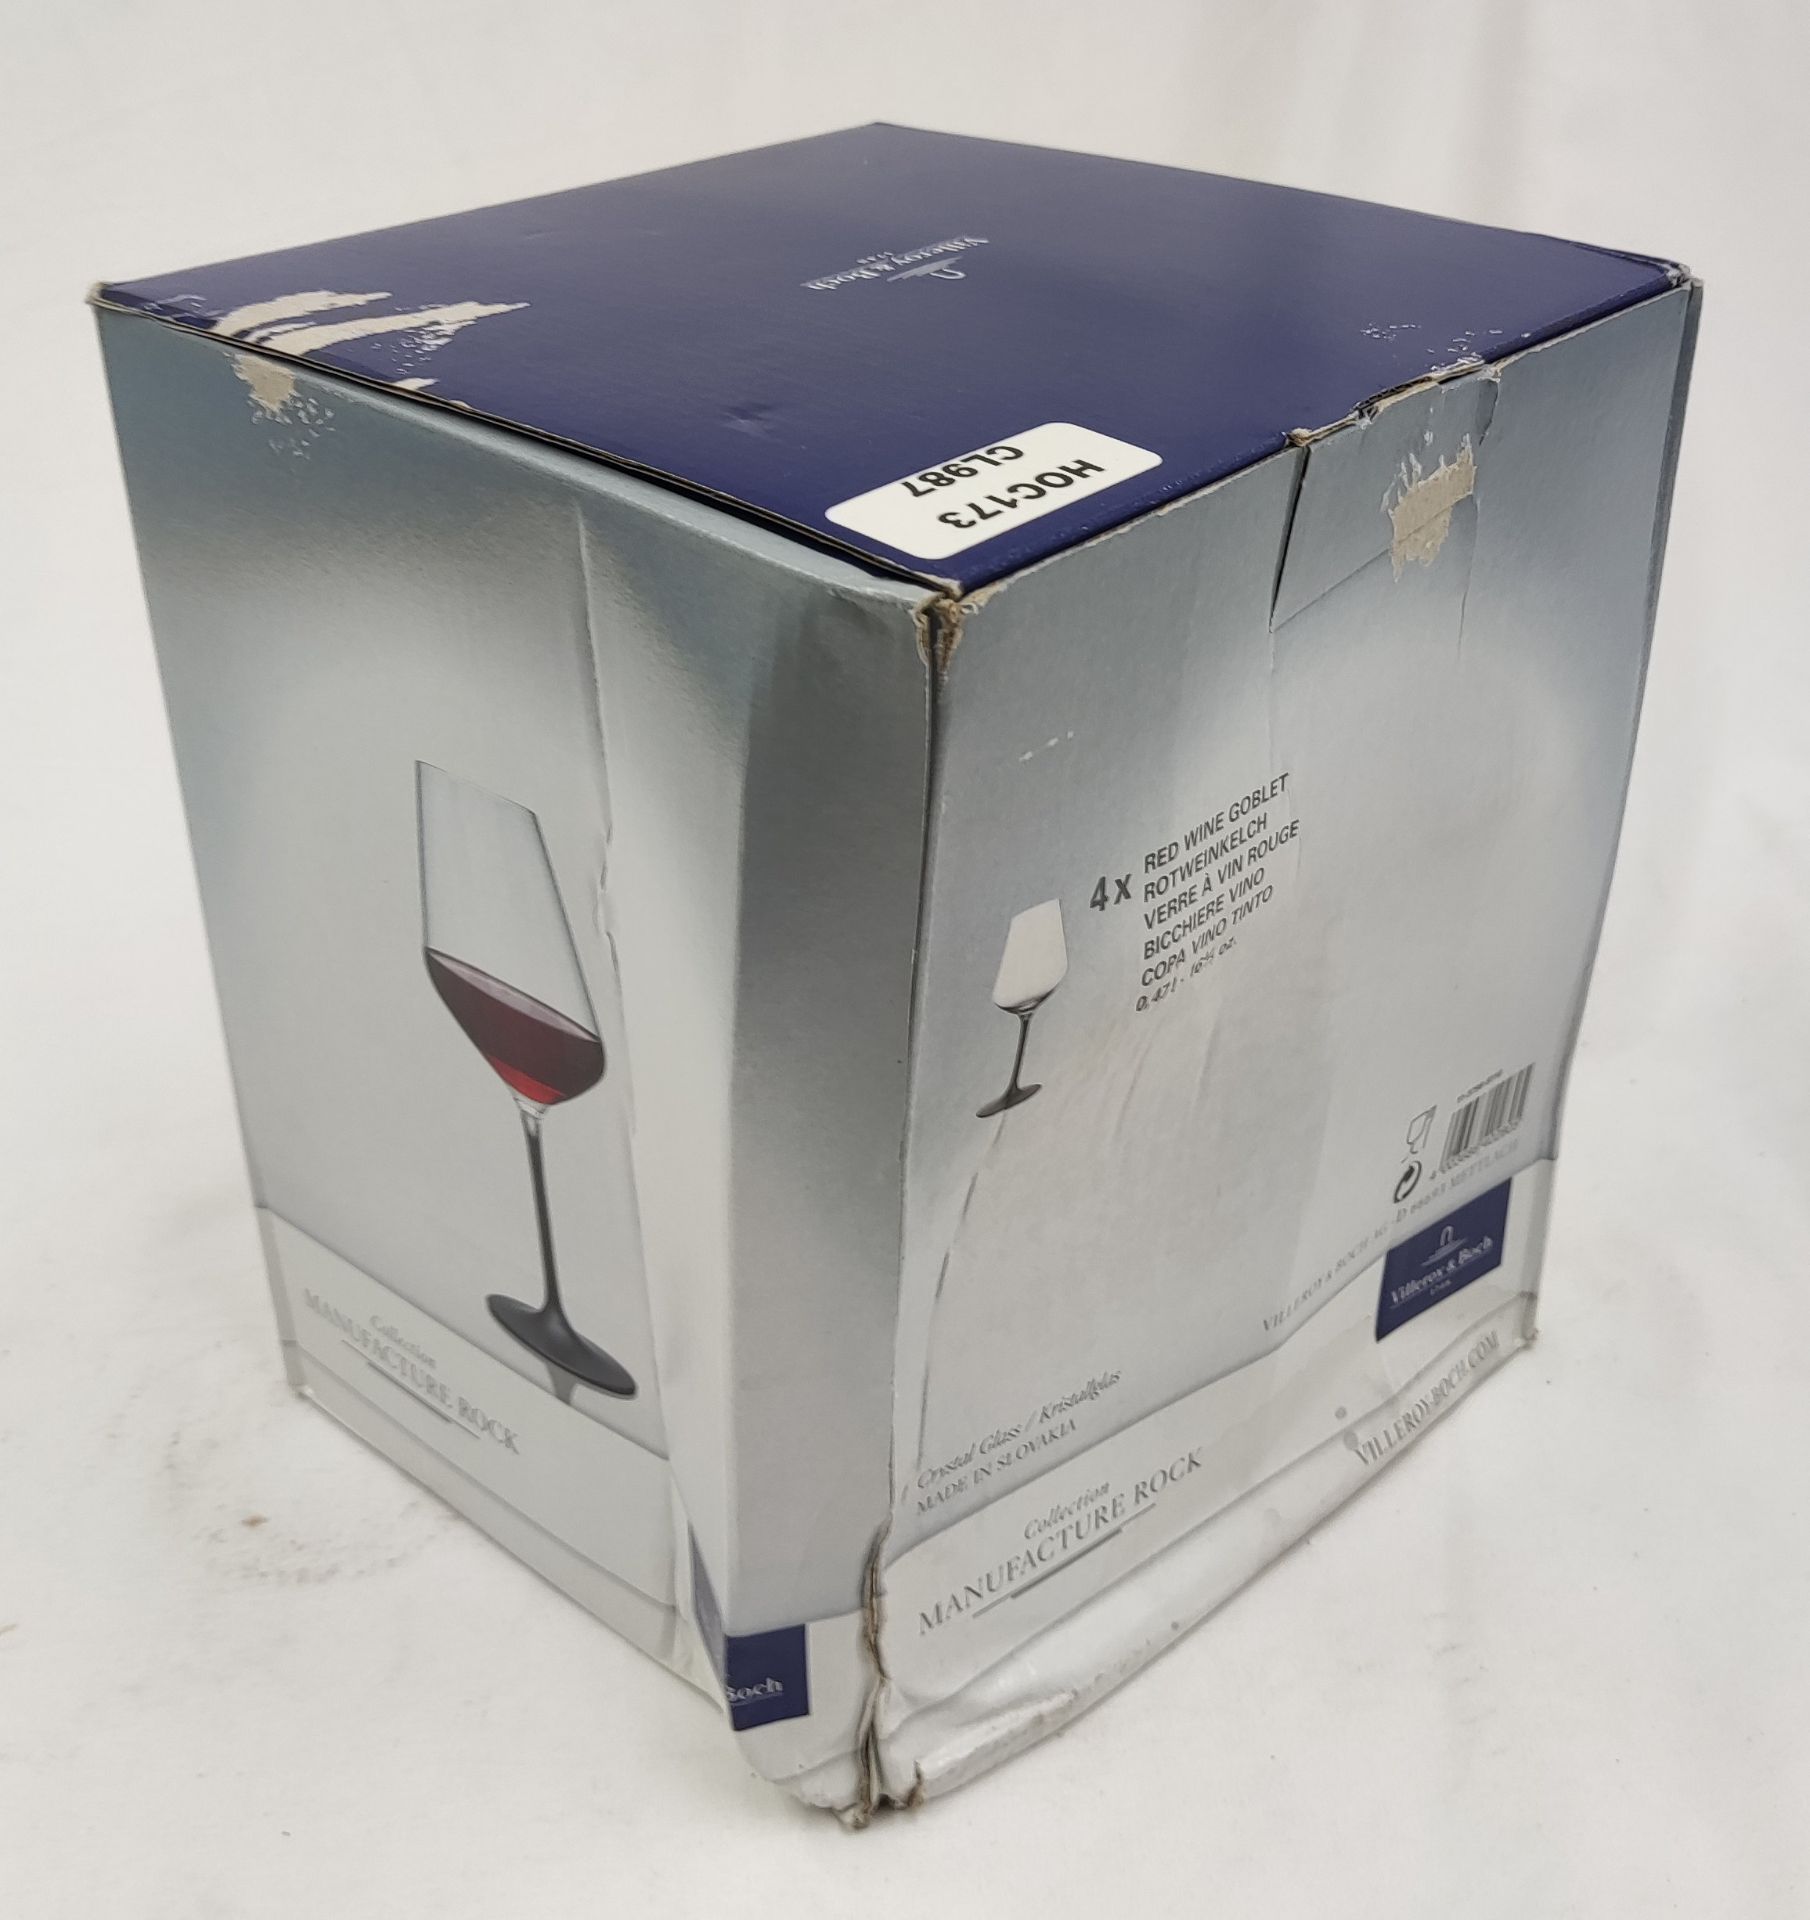 1 x VILLEROY & BOCH Manufacture Rock Red Wine Goblet Set, 4 Piece - New And Boxed - RRP £66 - Ref: - Image 9 of 12